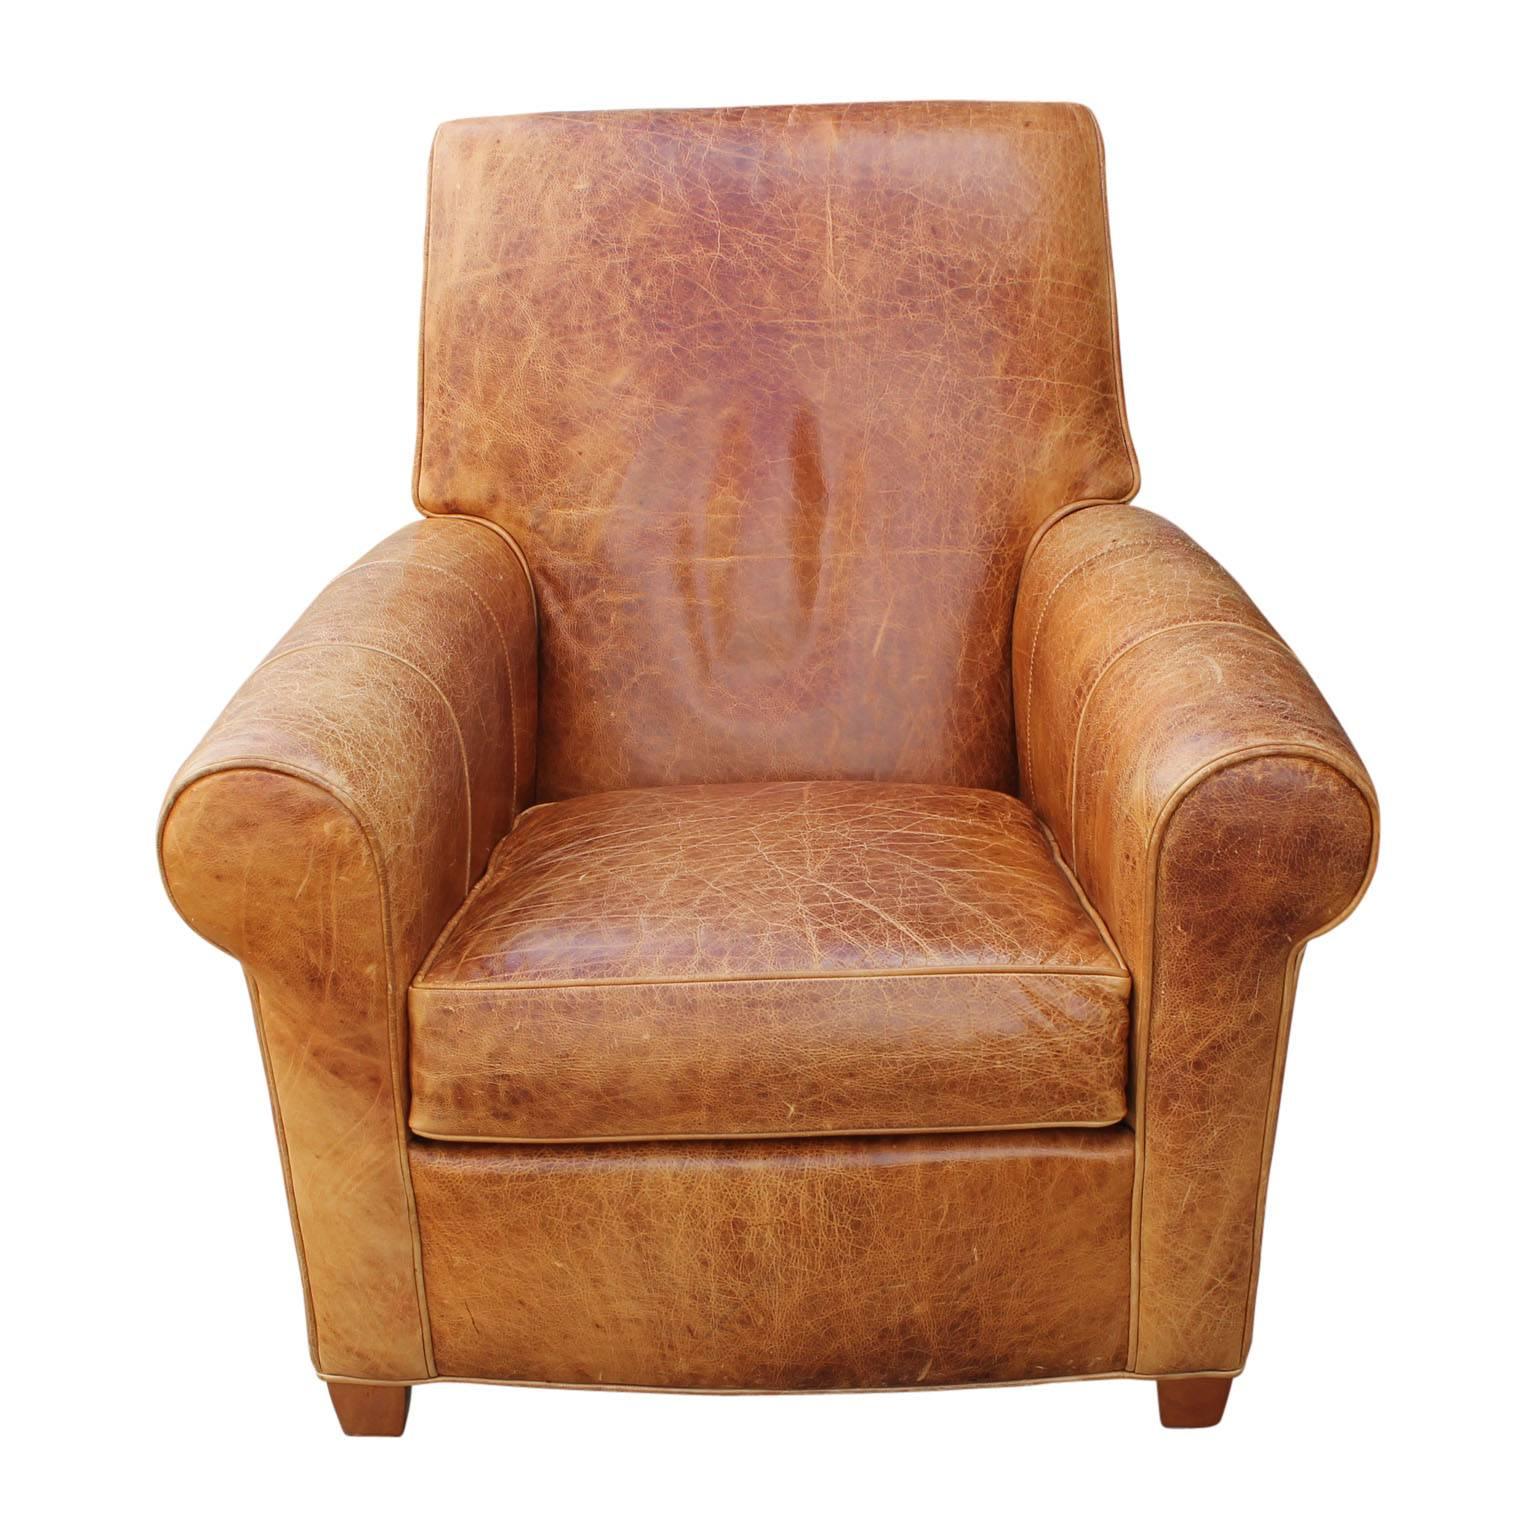 light brown leather chair with ottoman